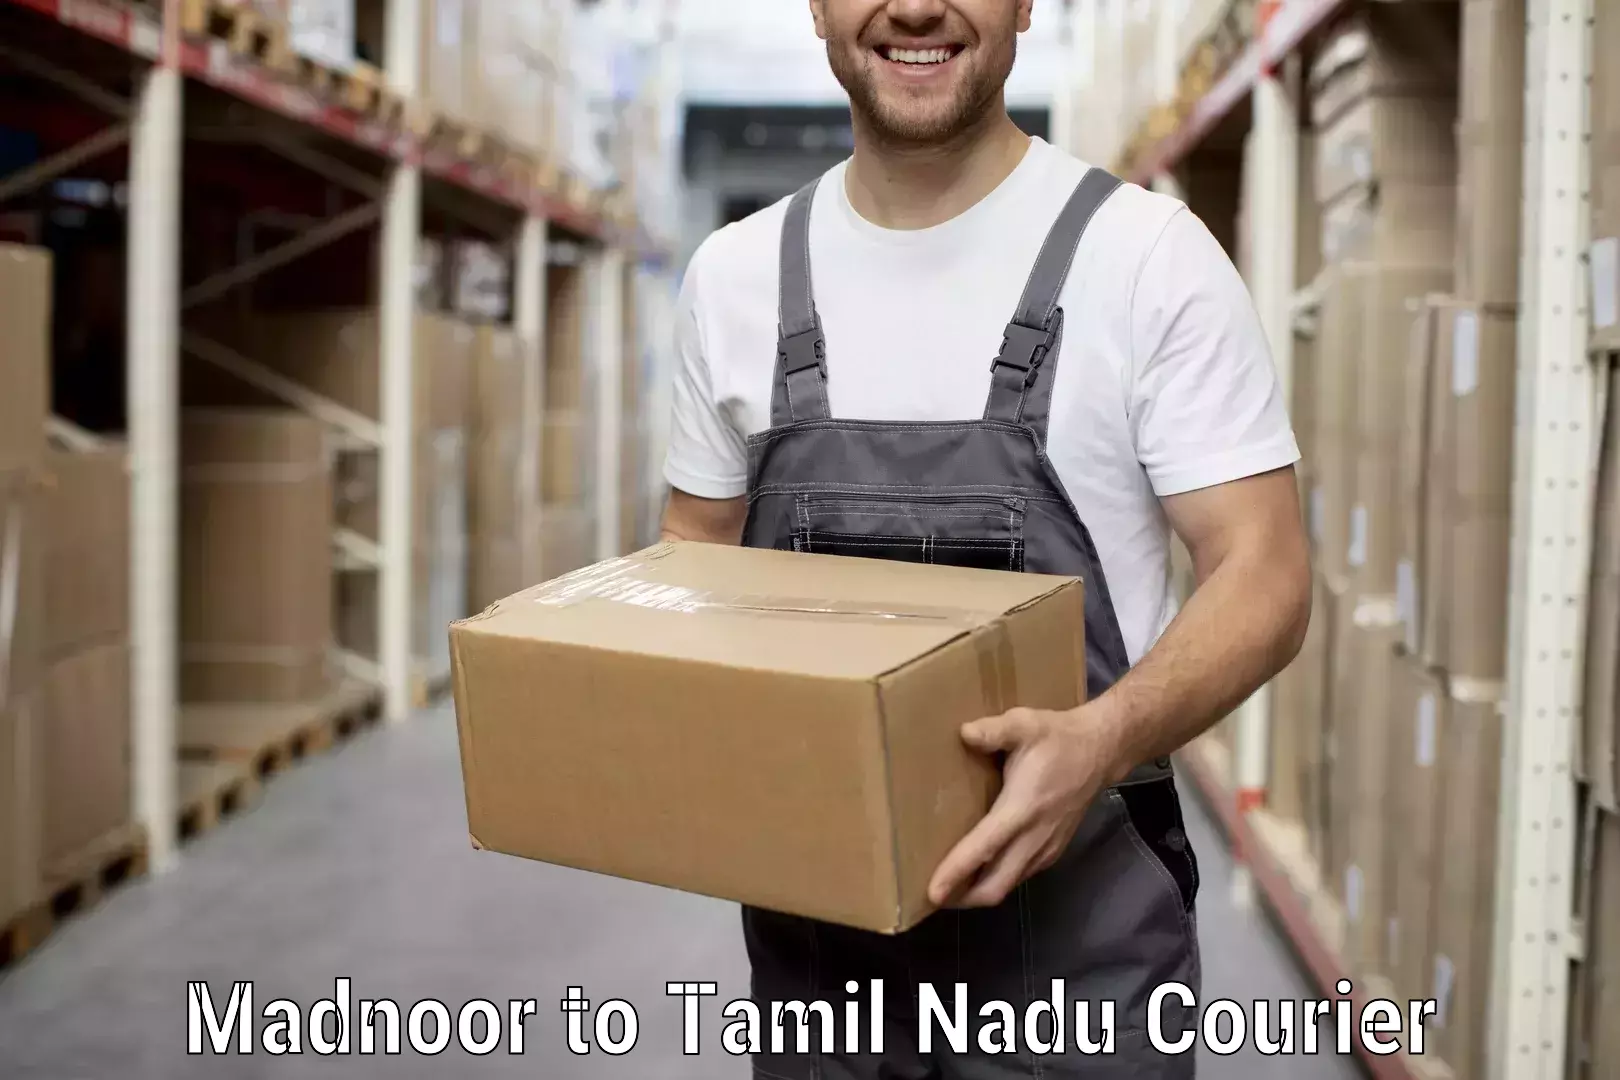 Professional moving assistance Madnoor to Thanjavur